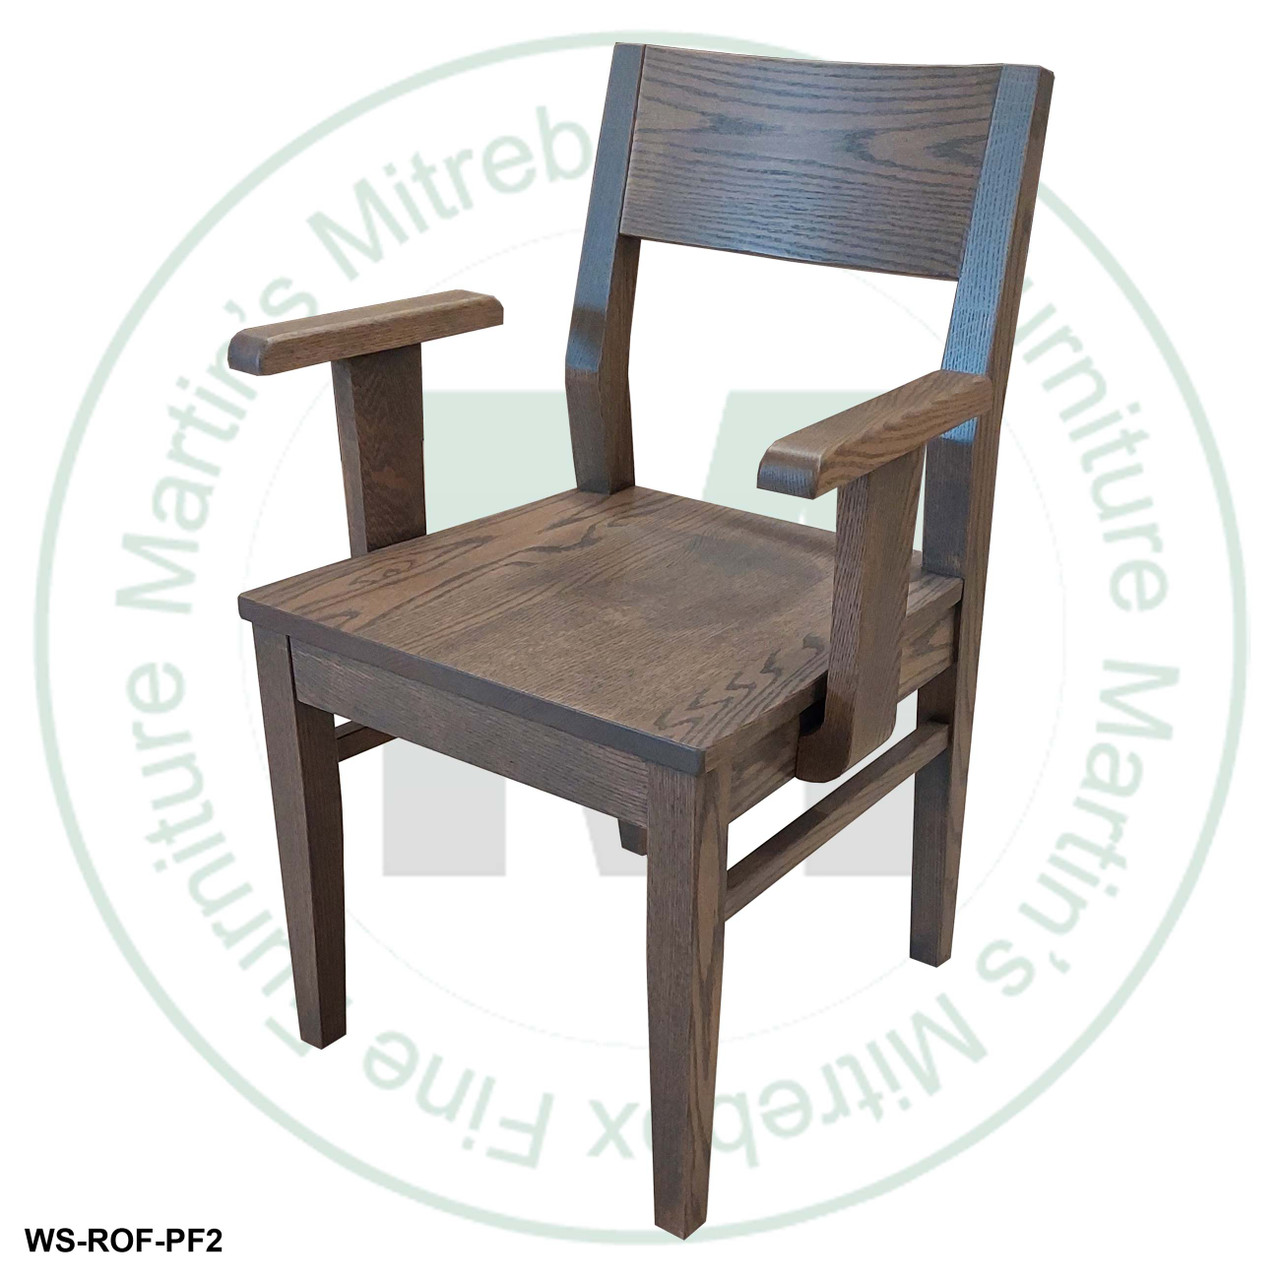 Maple Standford Arm Chair With Wood Seat